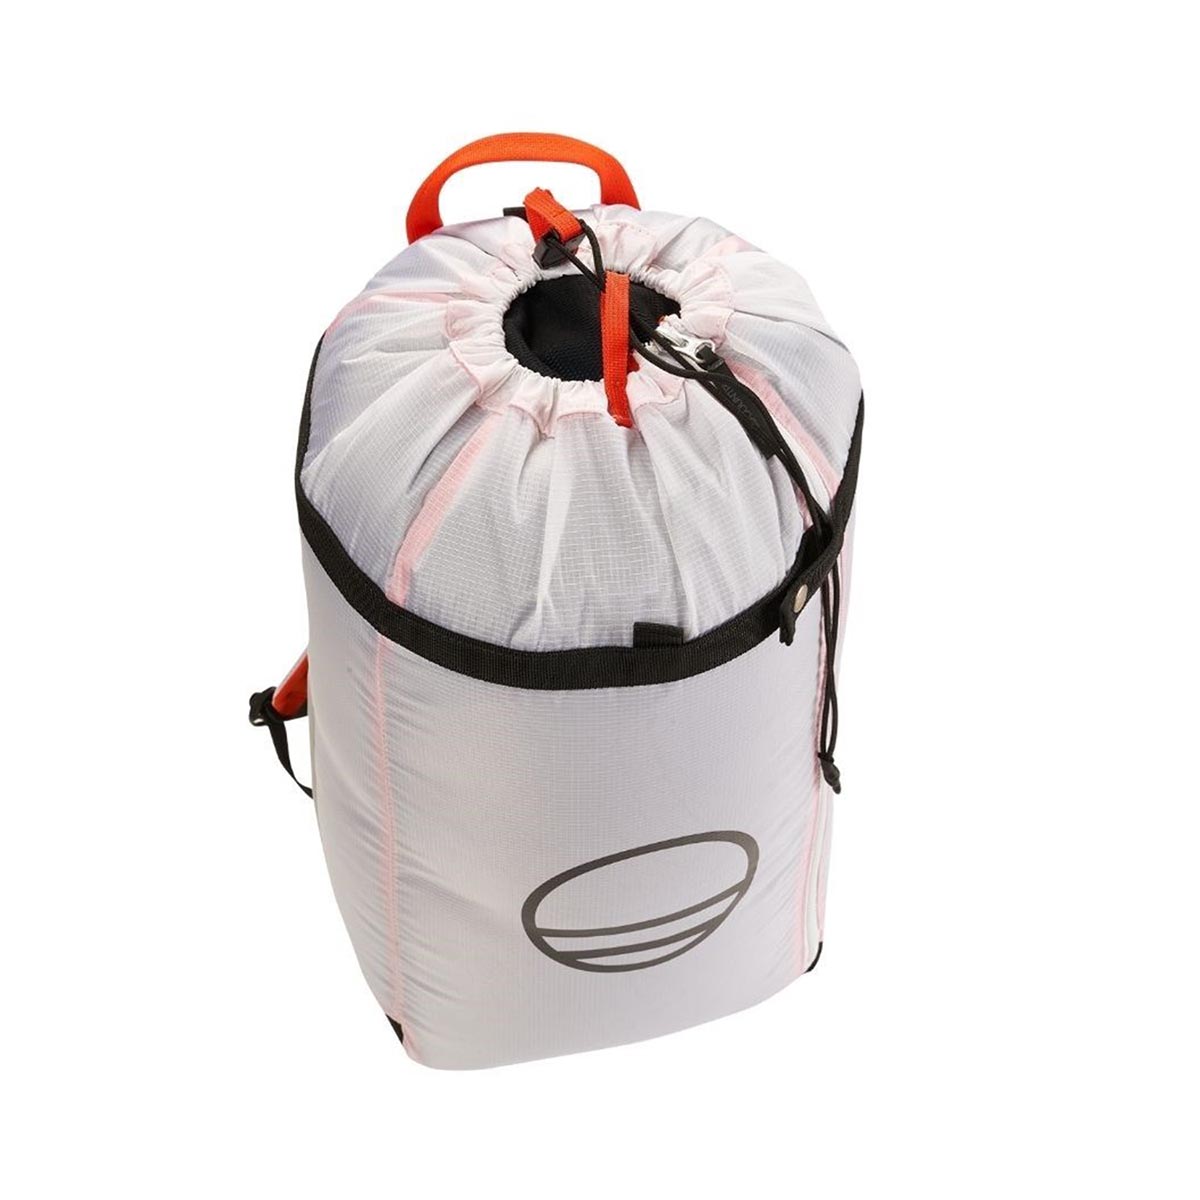 WILD COUNTRY - MOSQUITO BACKPACK 20 L